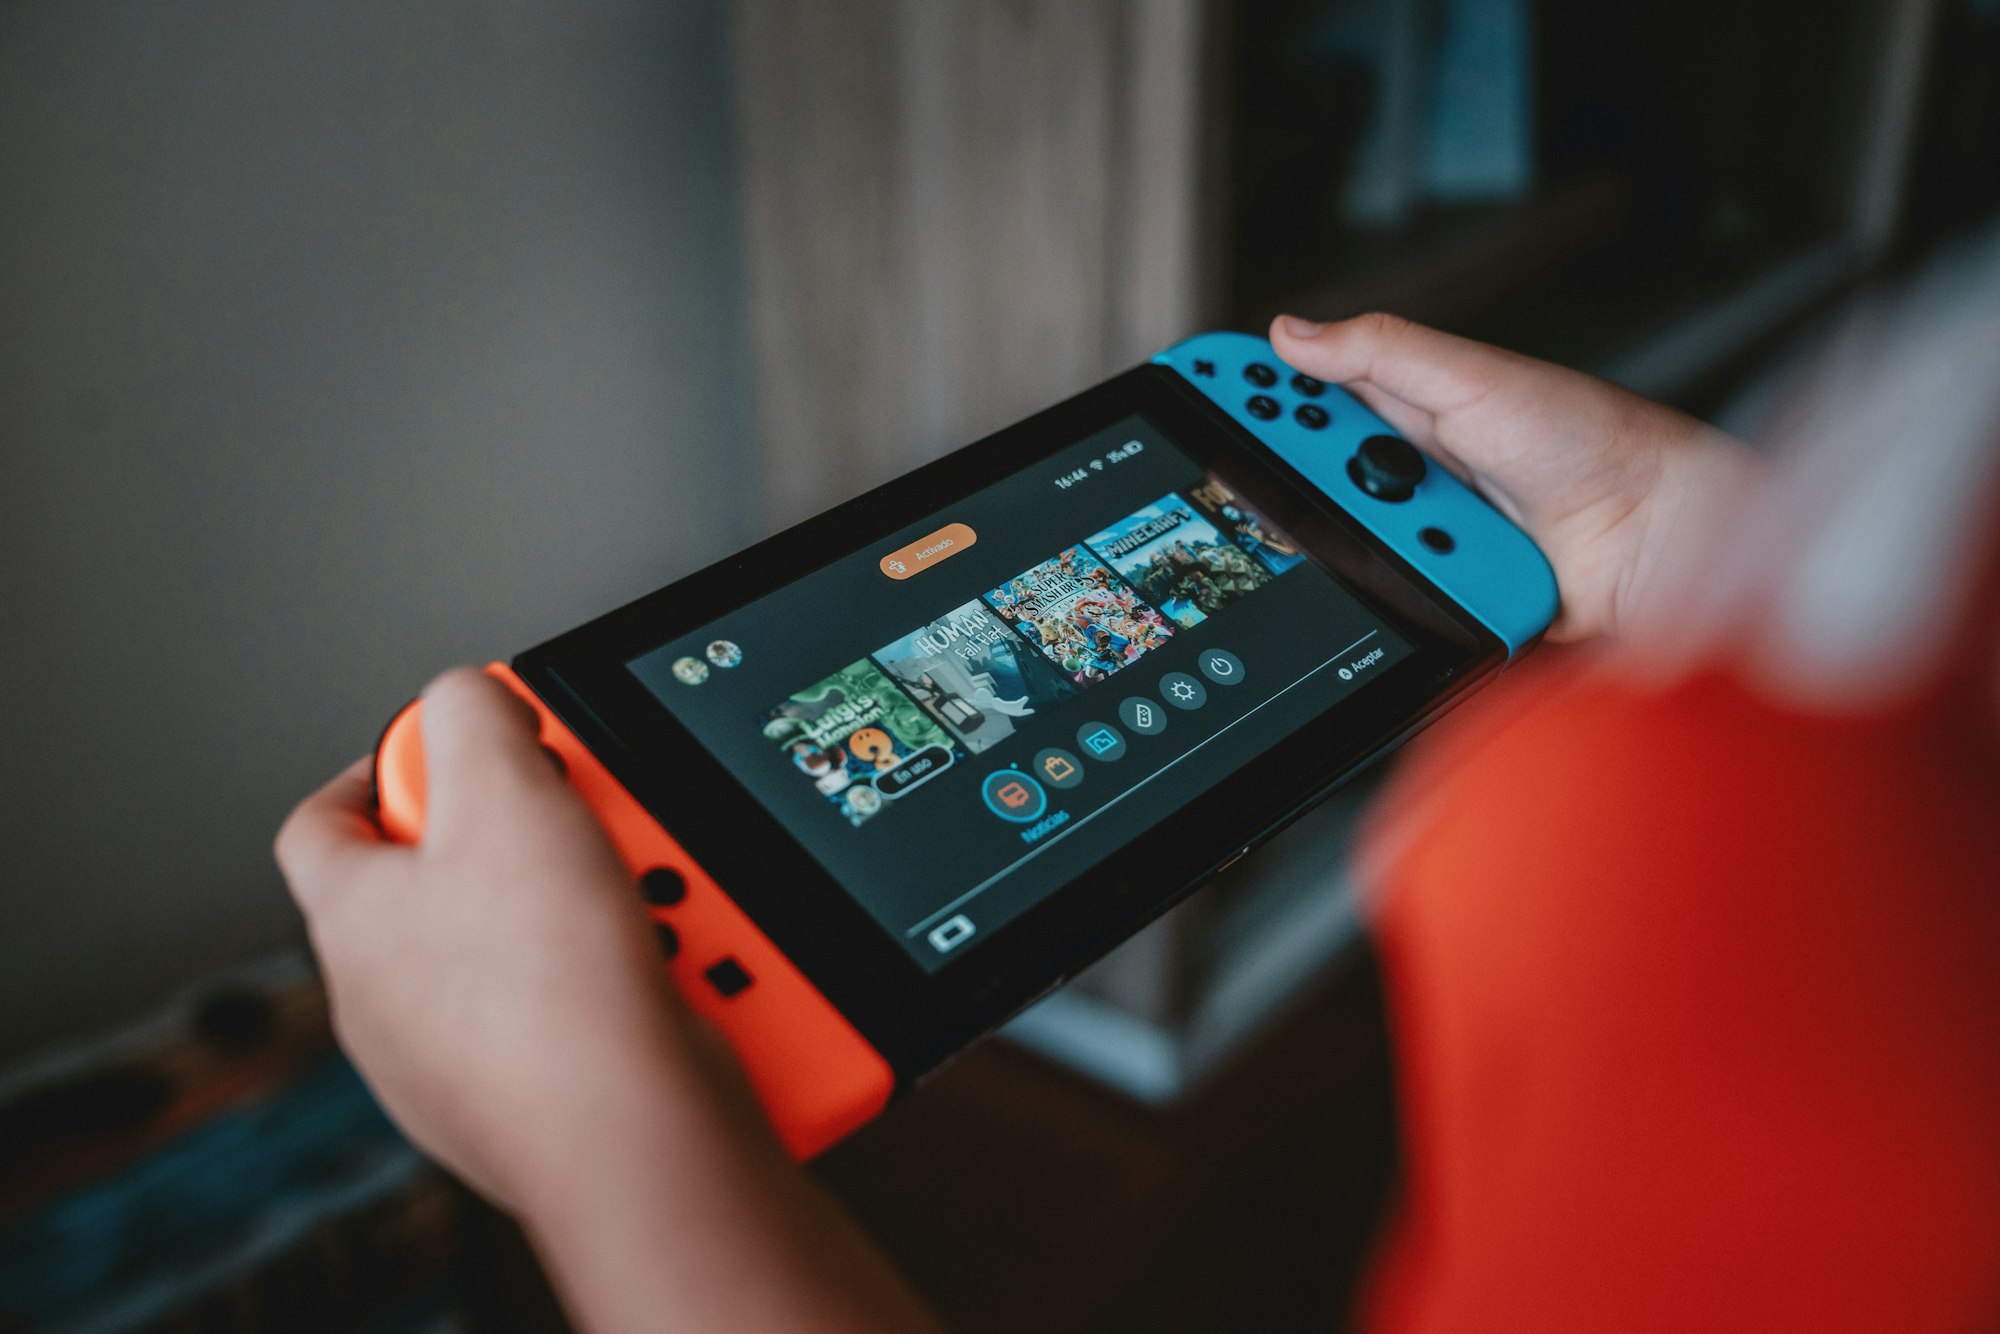 A Nintendo Switch console, showing the main menu, with red and blue remotes attached.